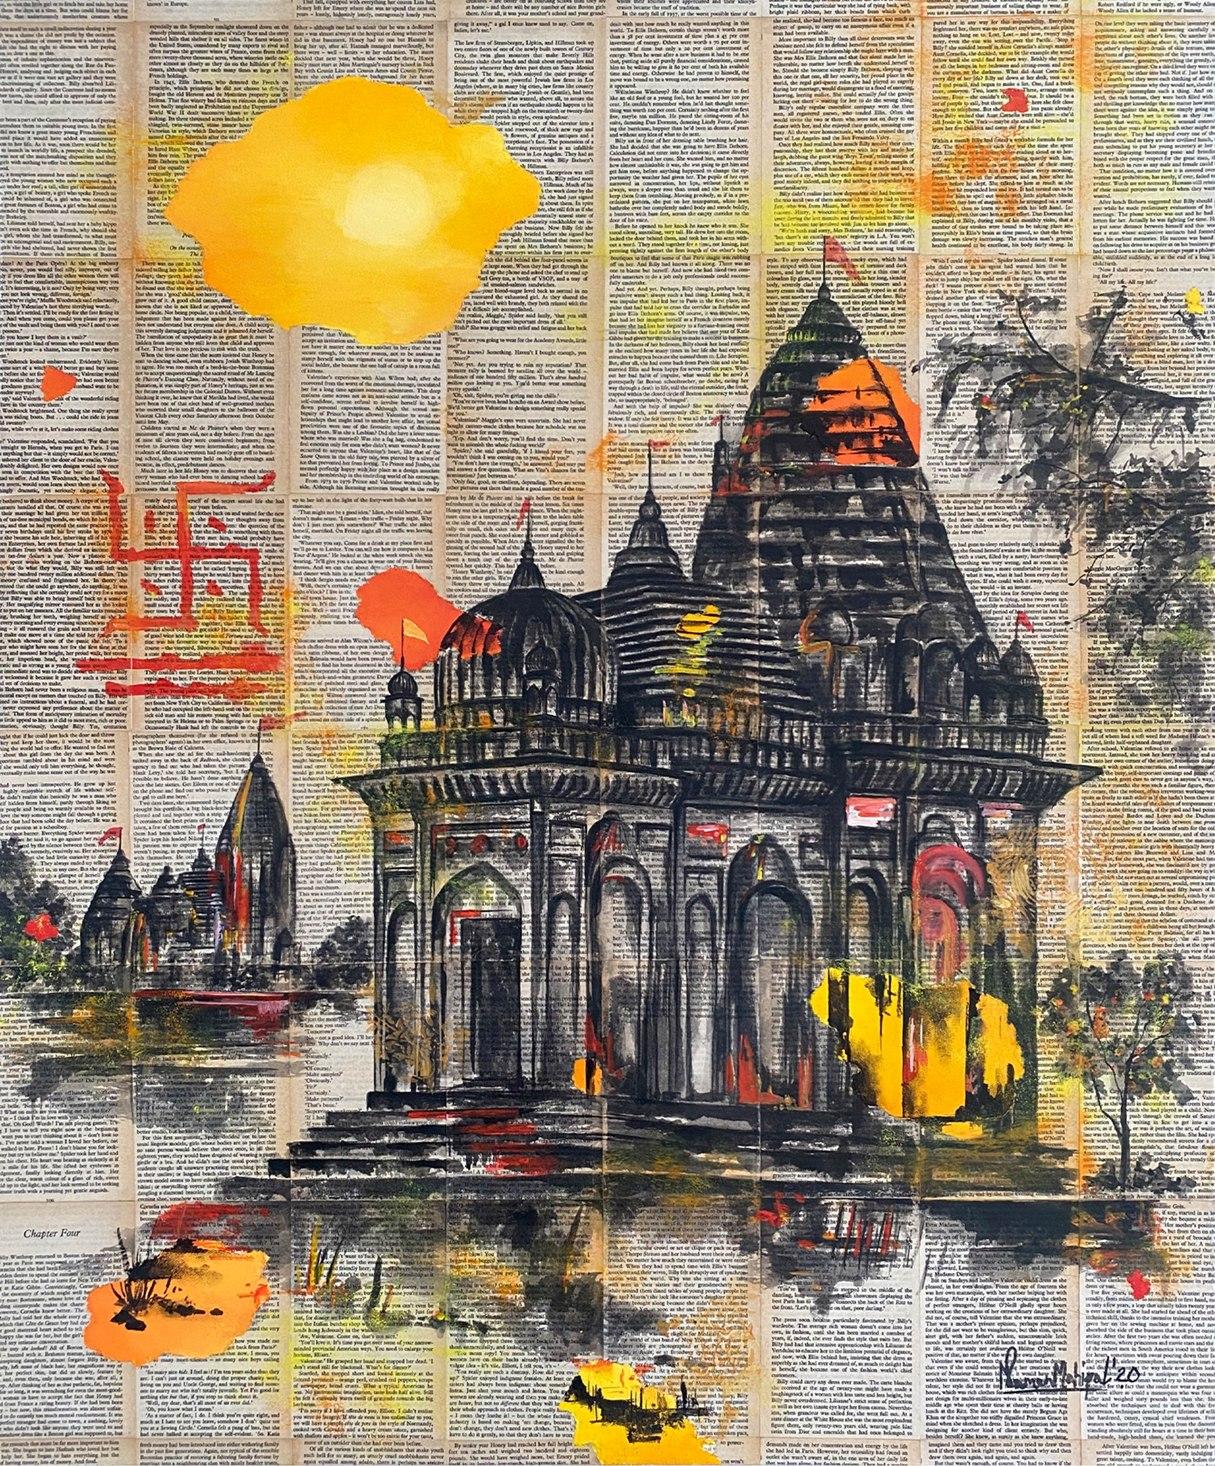 Naman Mahipal Figurative Painting - Untitled, Mixed Media Ink & Acrylic on Canvas by Indian Artist "In Stock"